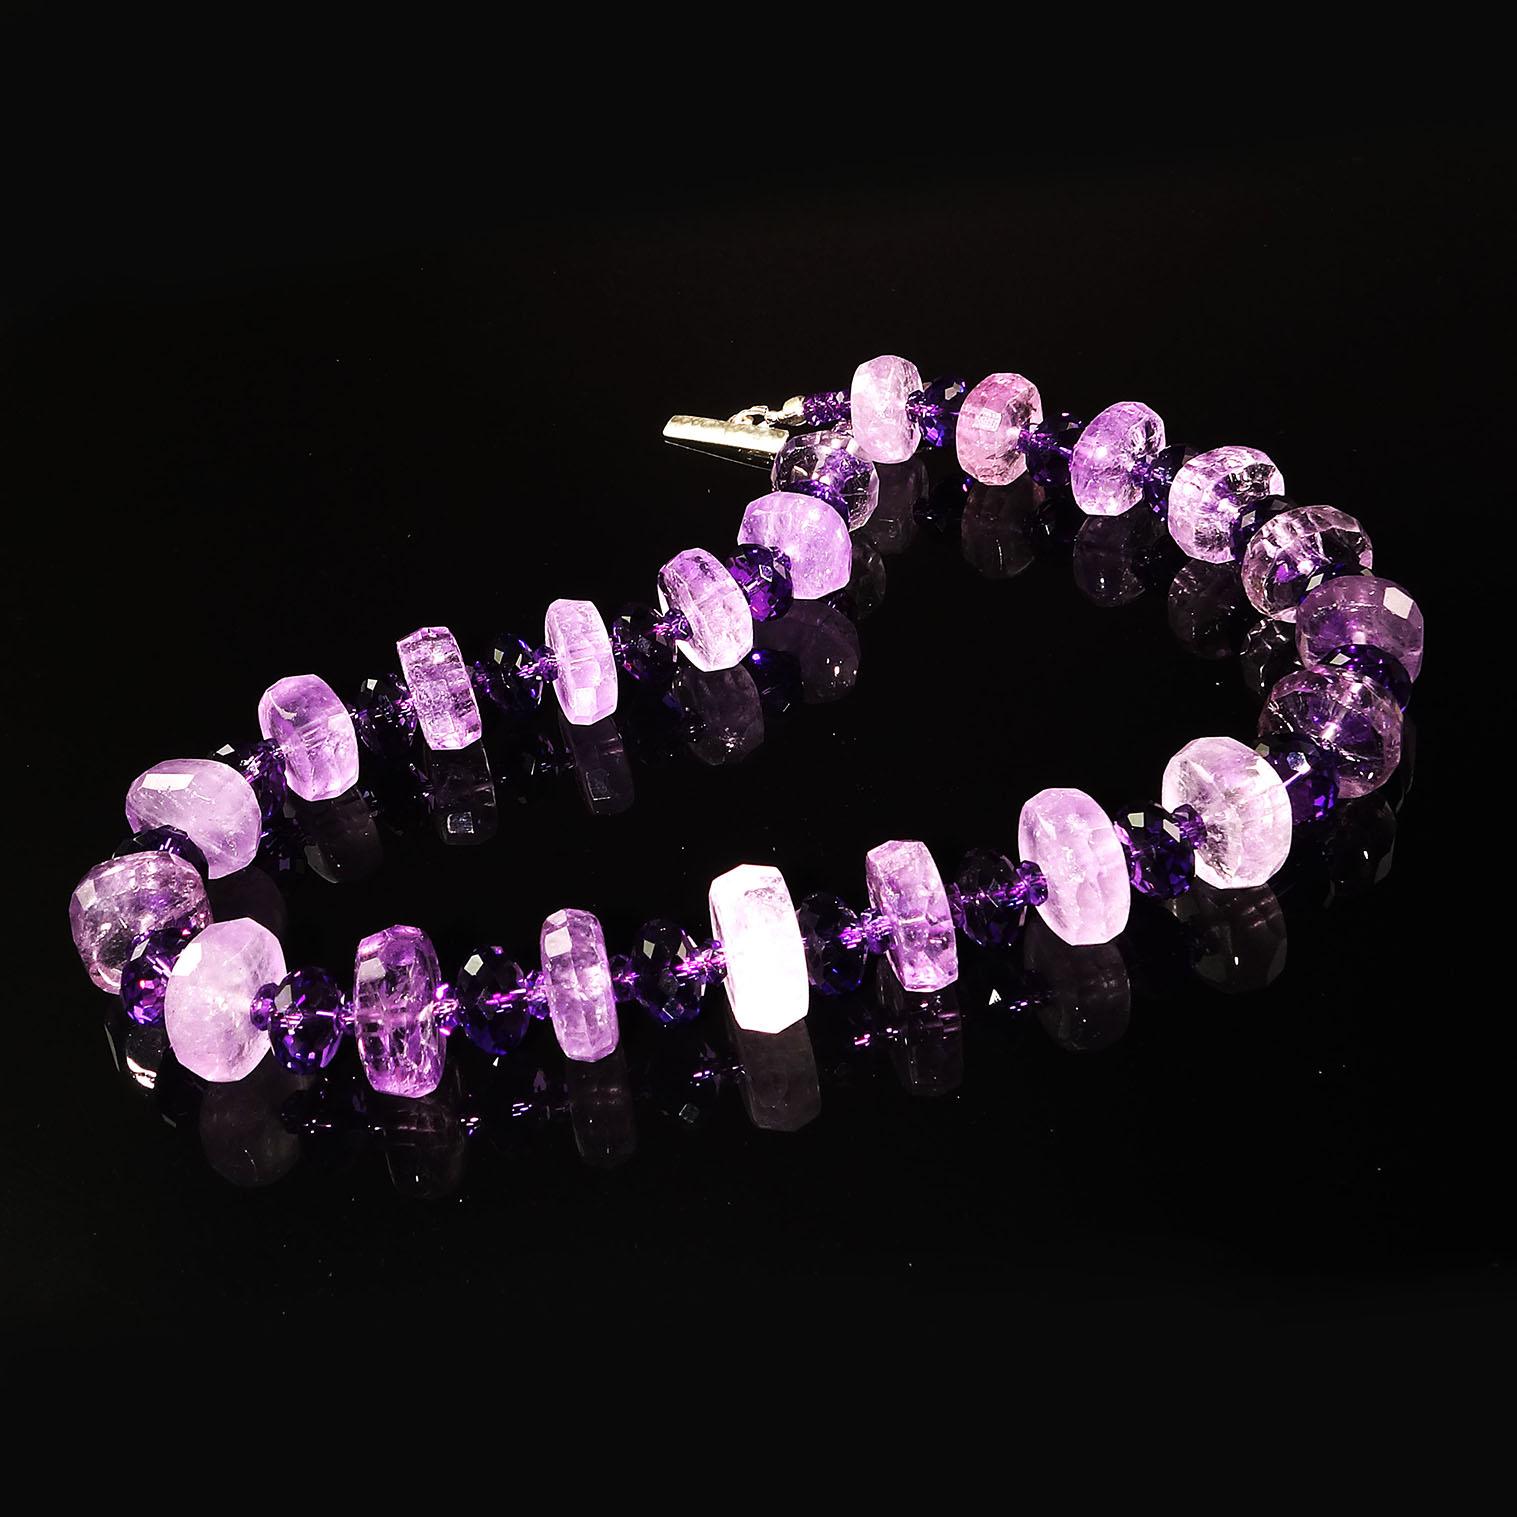 Handmade, unique necklace of rondels of larger, lighter Amethyst and alternating with fully faceted darker Amethyst in two sizes.  The larger Amethyst are 14MM with flat sides and faceted edges.  The 10MM darker sparkling Amethysts are fully faceted